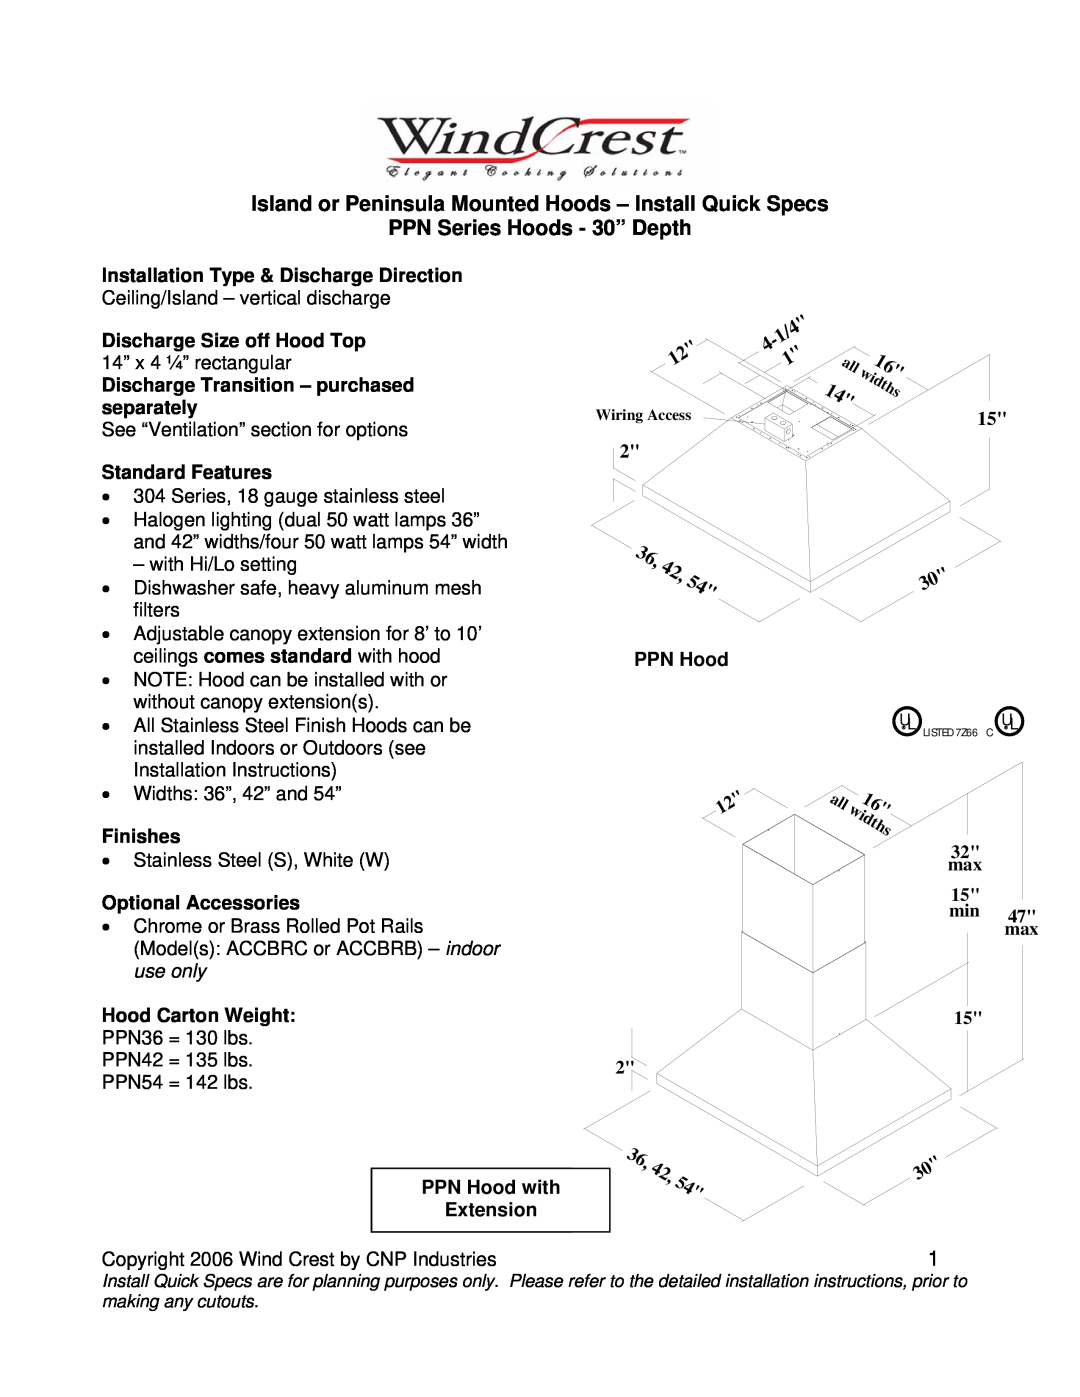 Wind Crest PPN installation instructions Island or Peninsula Mounted Hoods - Install Quick Specs, Standard Features 